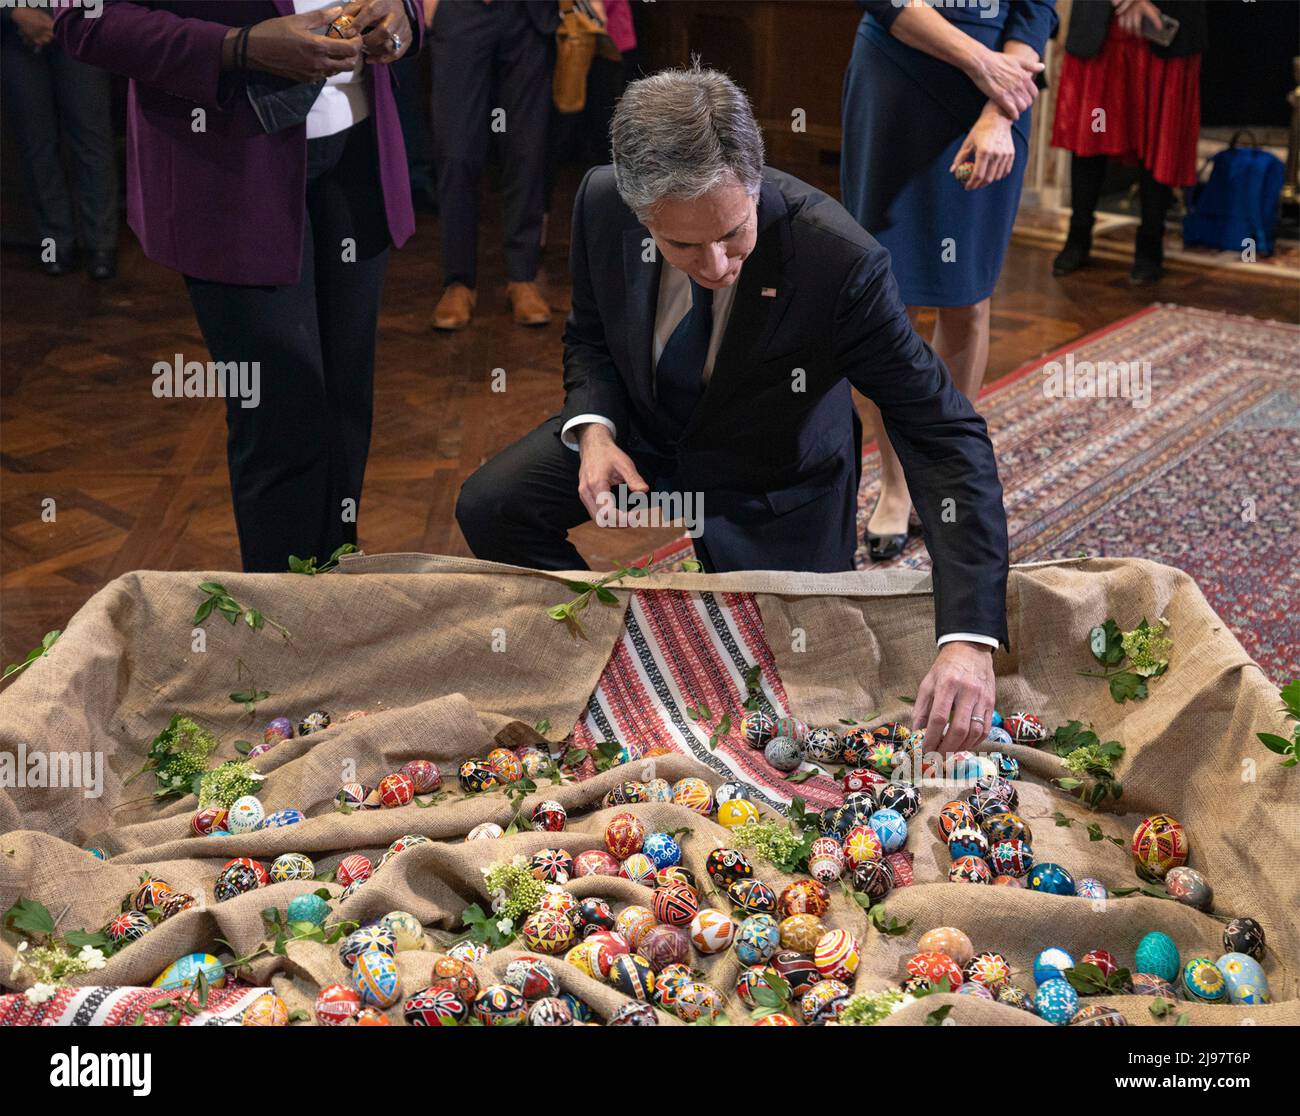 New York City, United States of America. 19 May, 2022. U.S. Secretary of State Antony Blinken, looks at ornately decorated pysanka eggs made by Ukrainian artist Sofika Zielyk, during a visit to the Ukrainian Institute of America, May 19, 2022 in New York City, New York.  Credit: Freddie Everett/State Department/Alamy Live News Stock Photo